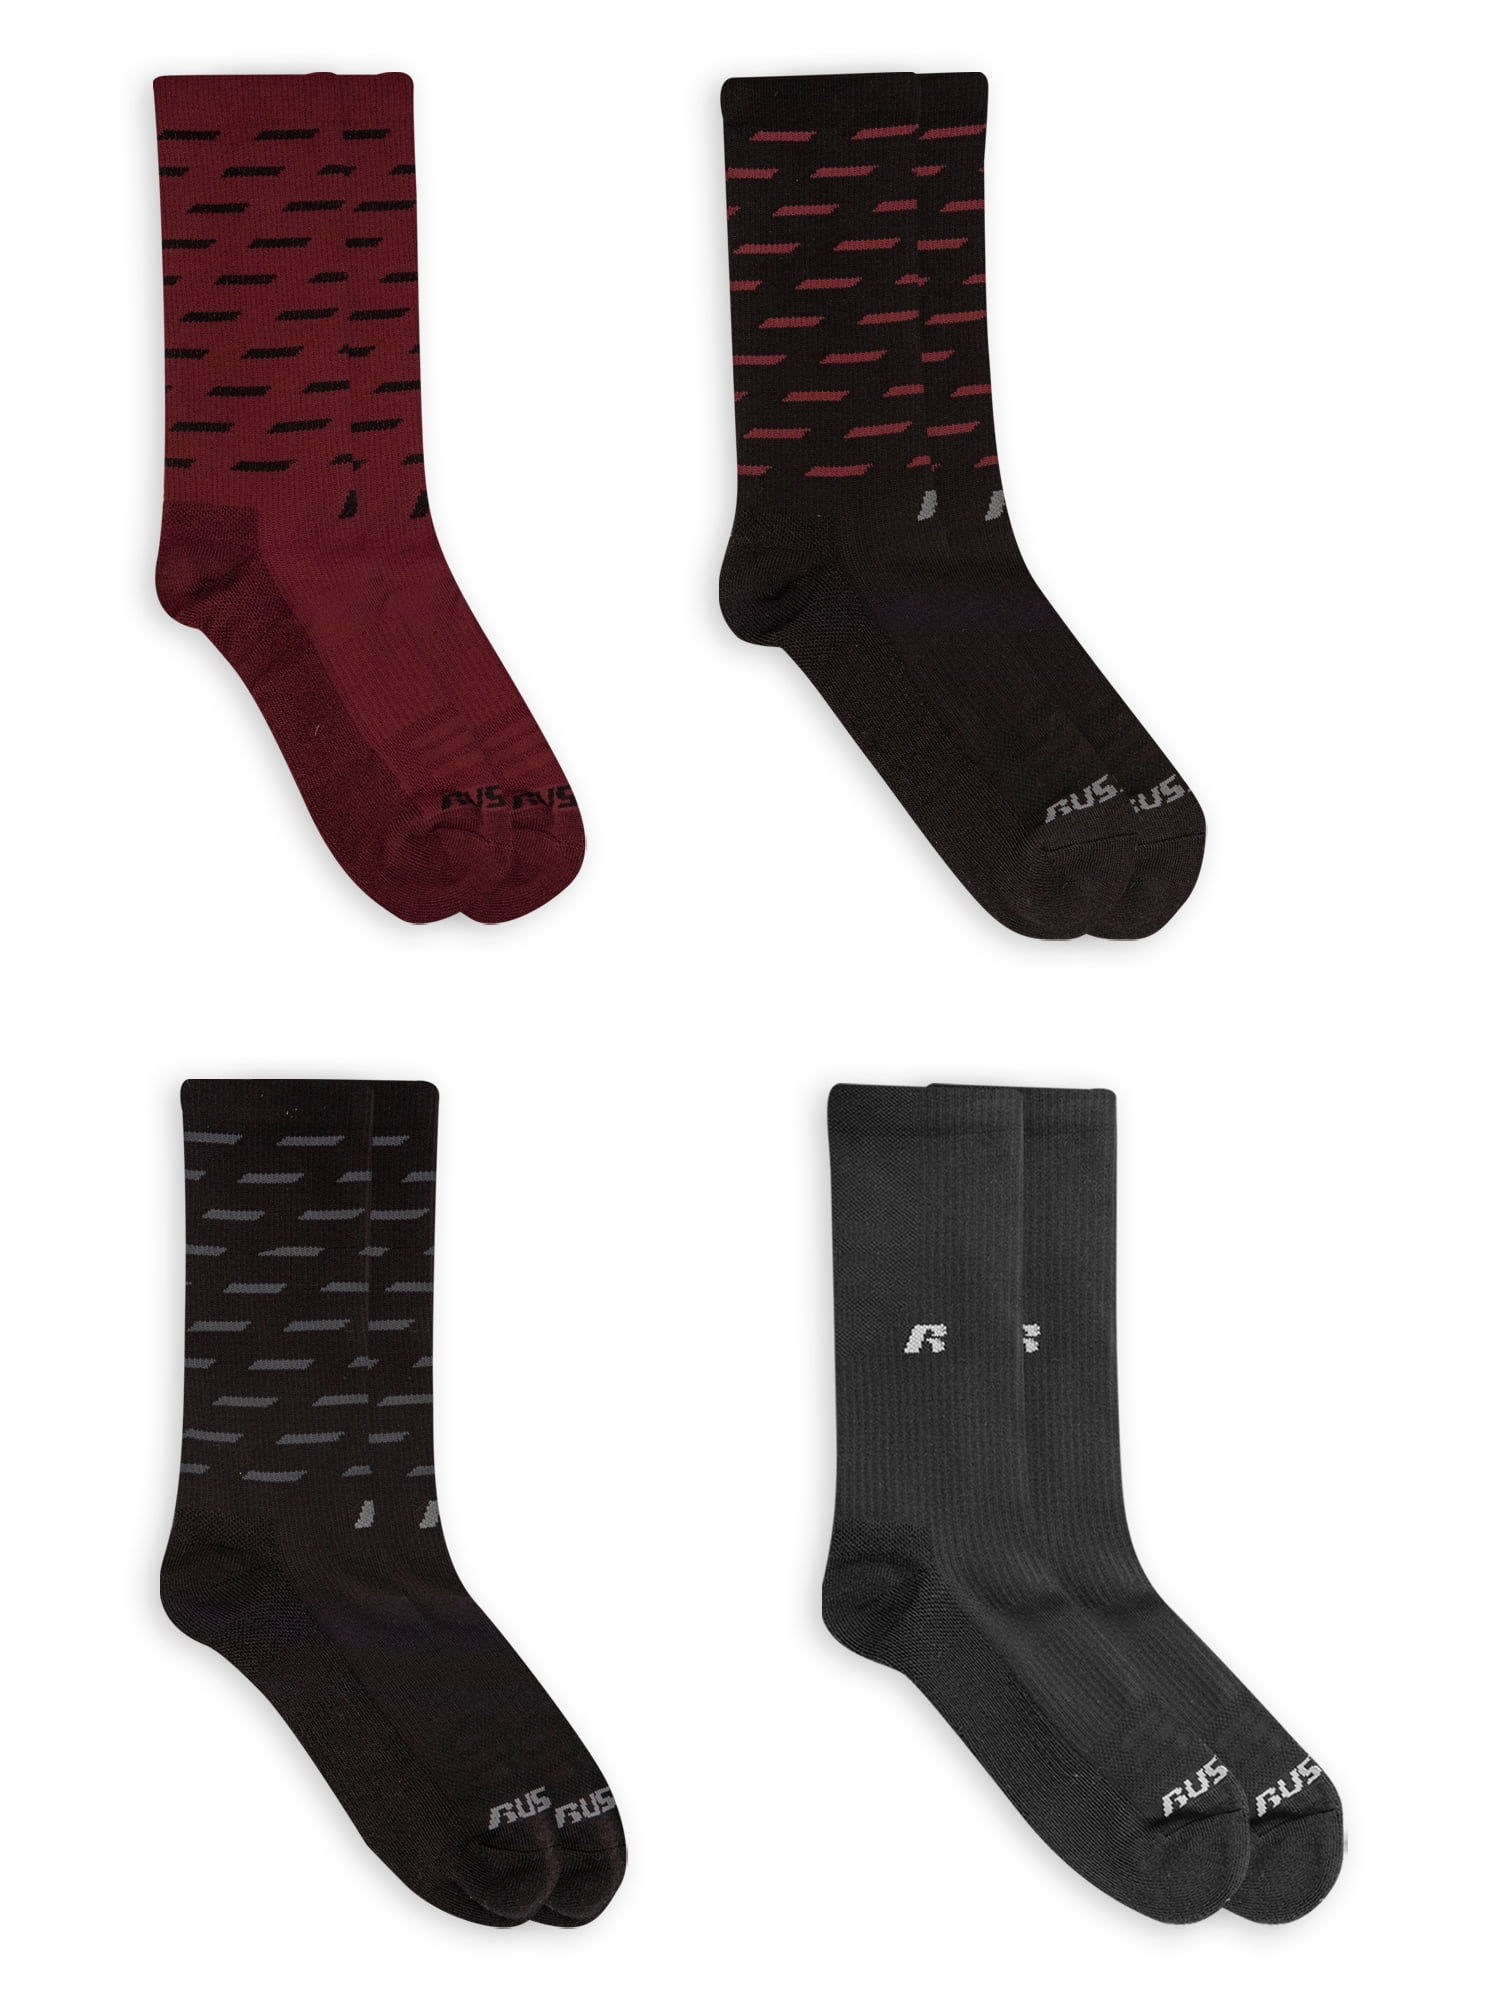 Russell Men's Work to Work Out Crew Socks - Walmart.com